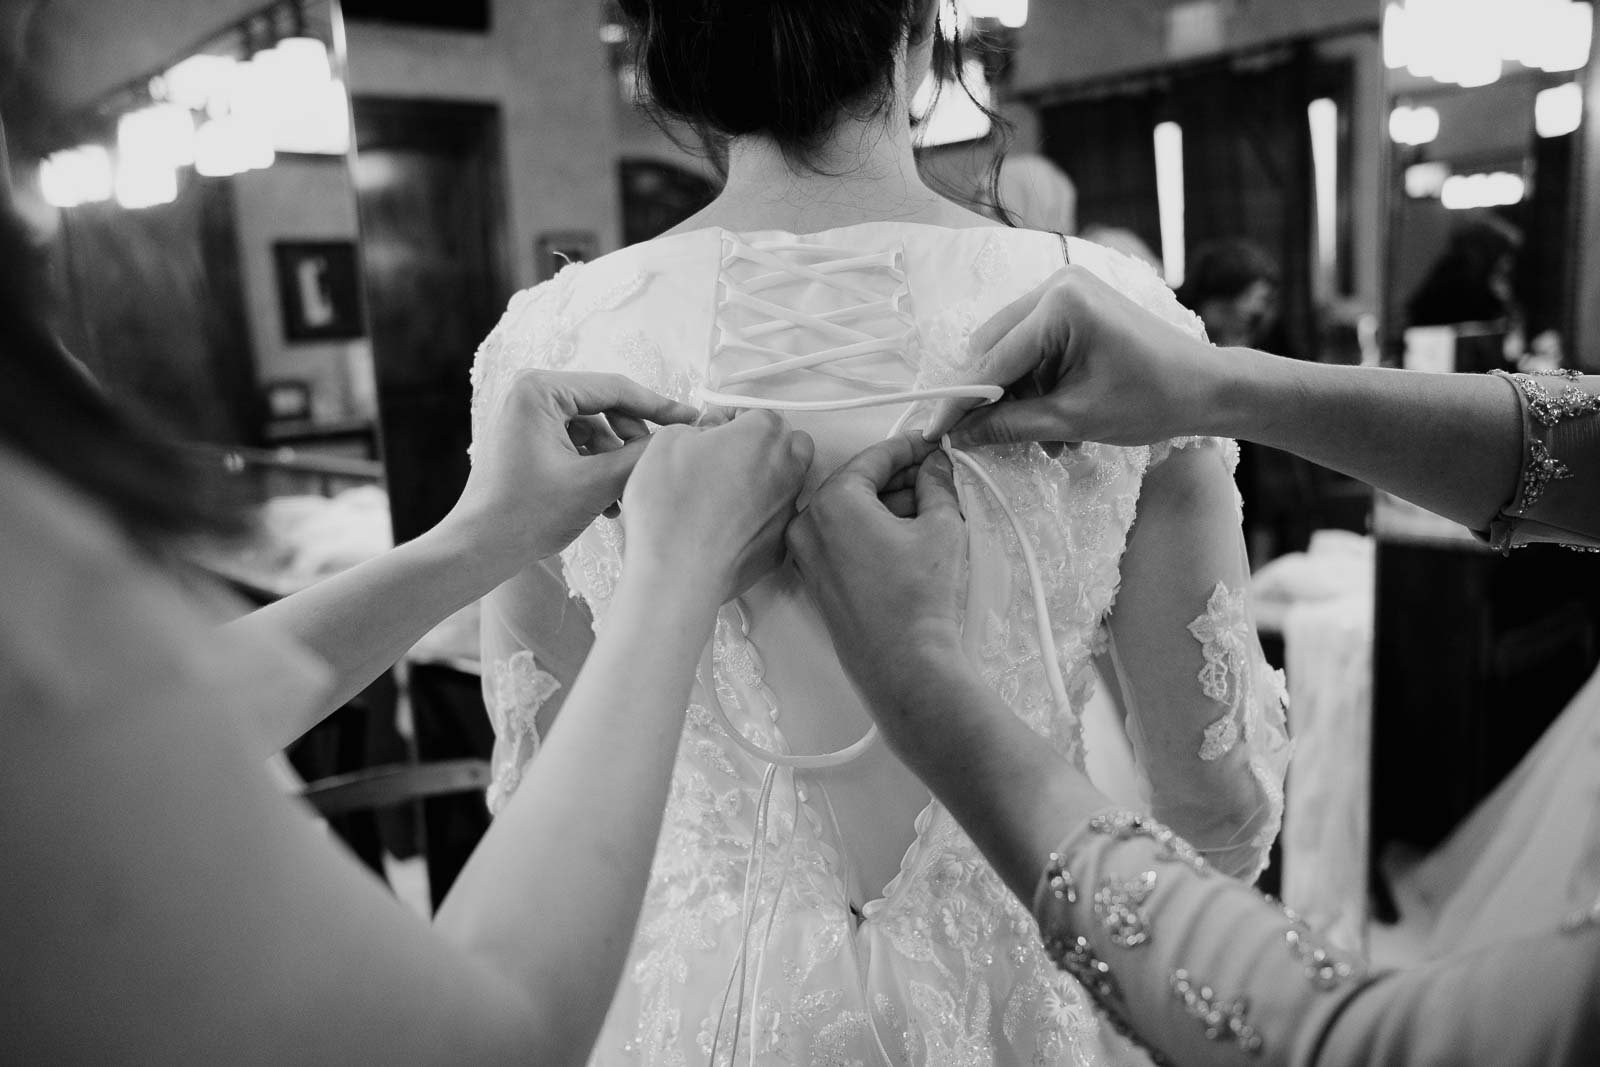 Hands at the back of the dress as the dress is tied